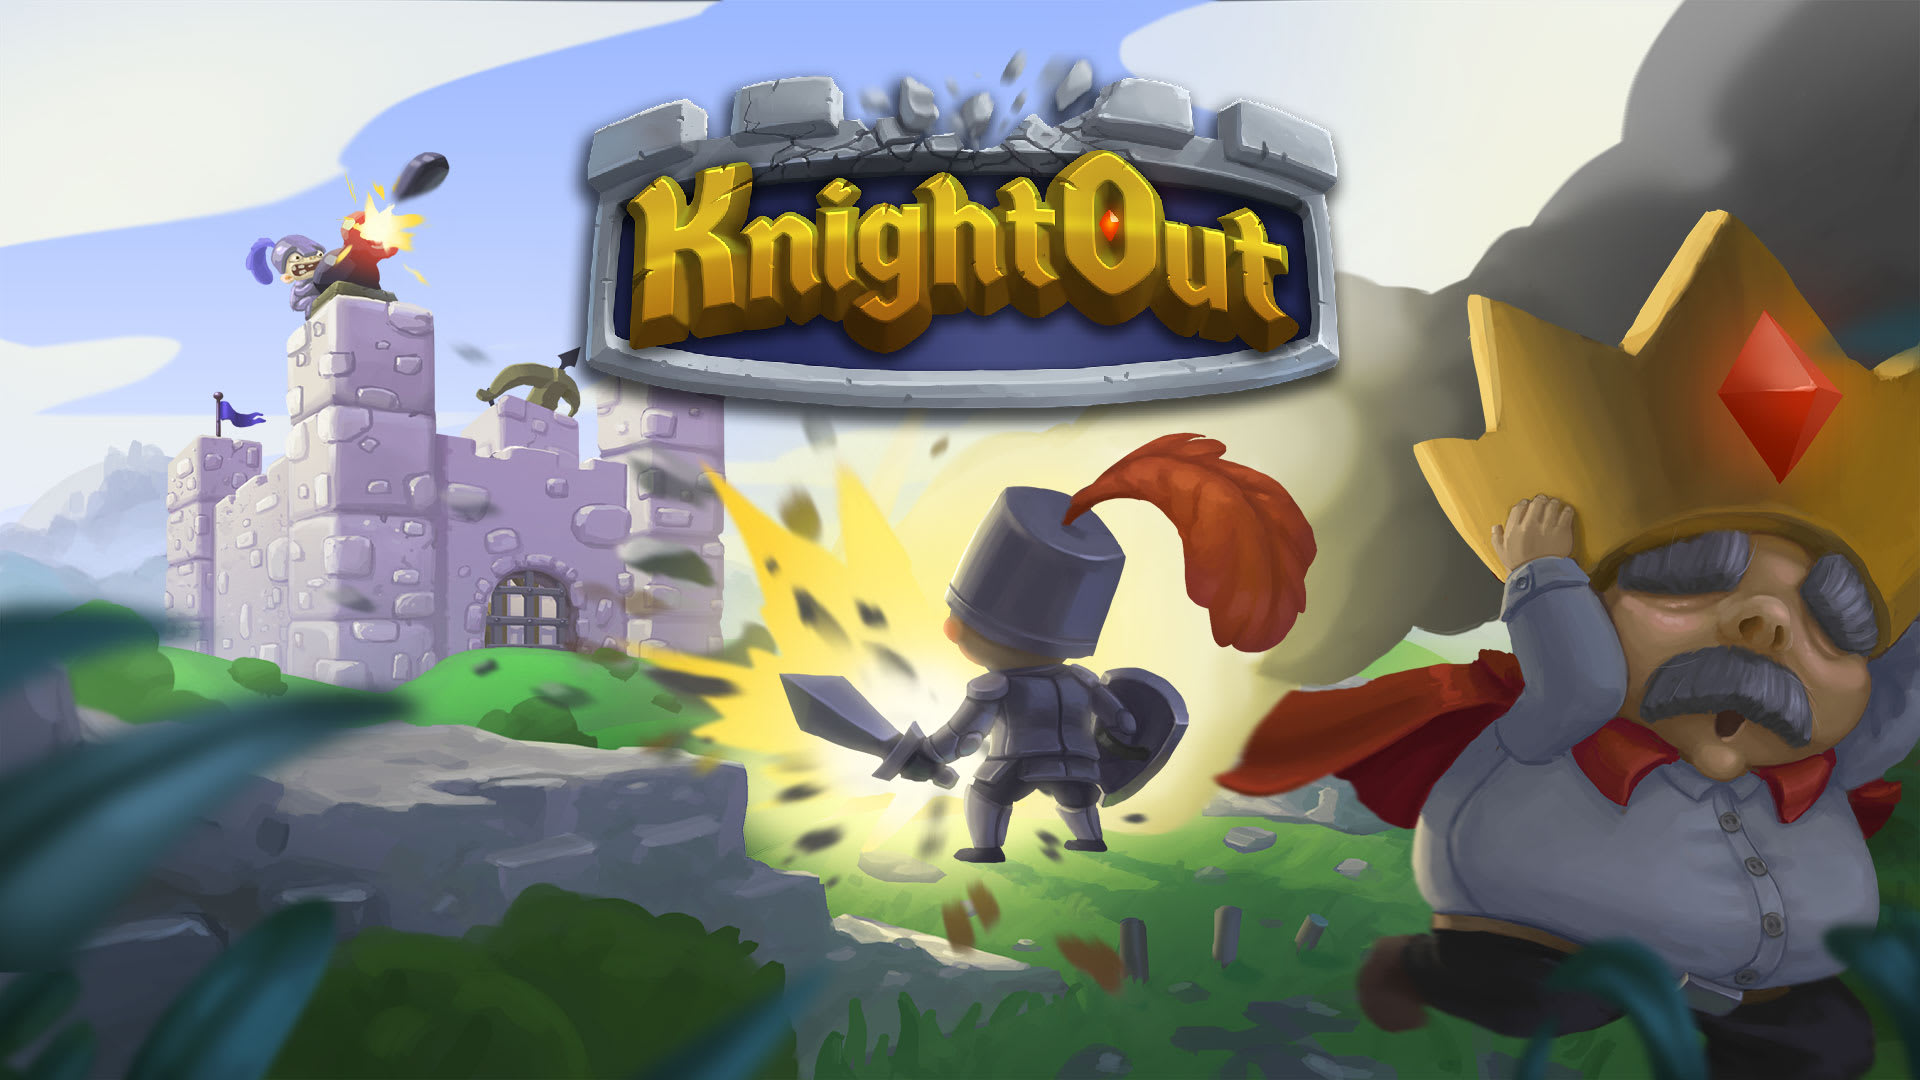 KnightOut is a local party brawler for 1-4 players! Play with or against your friends in a frantic battle. Half the battle is won by building an epic castle with deadly weapons and traps. 1